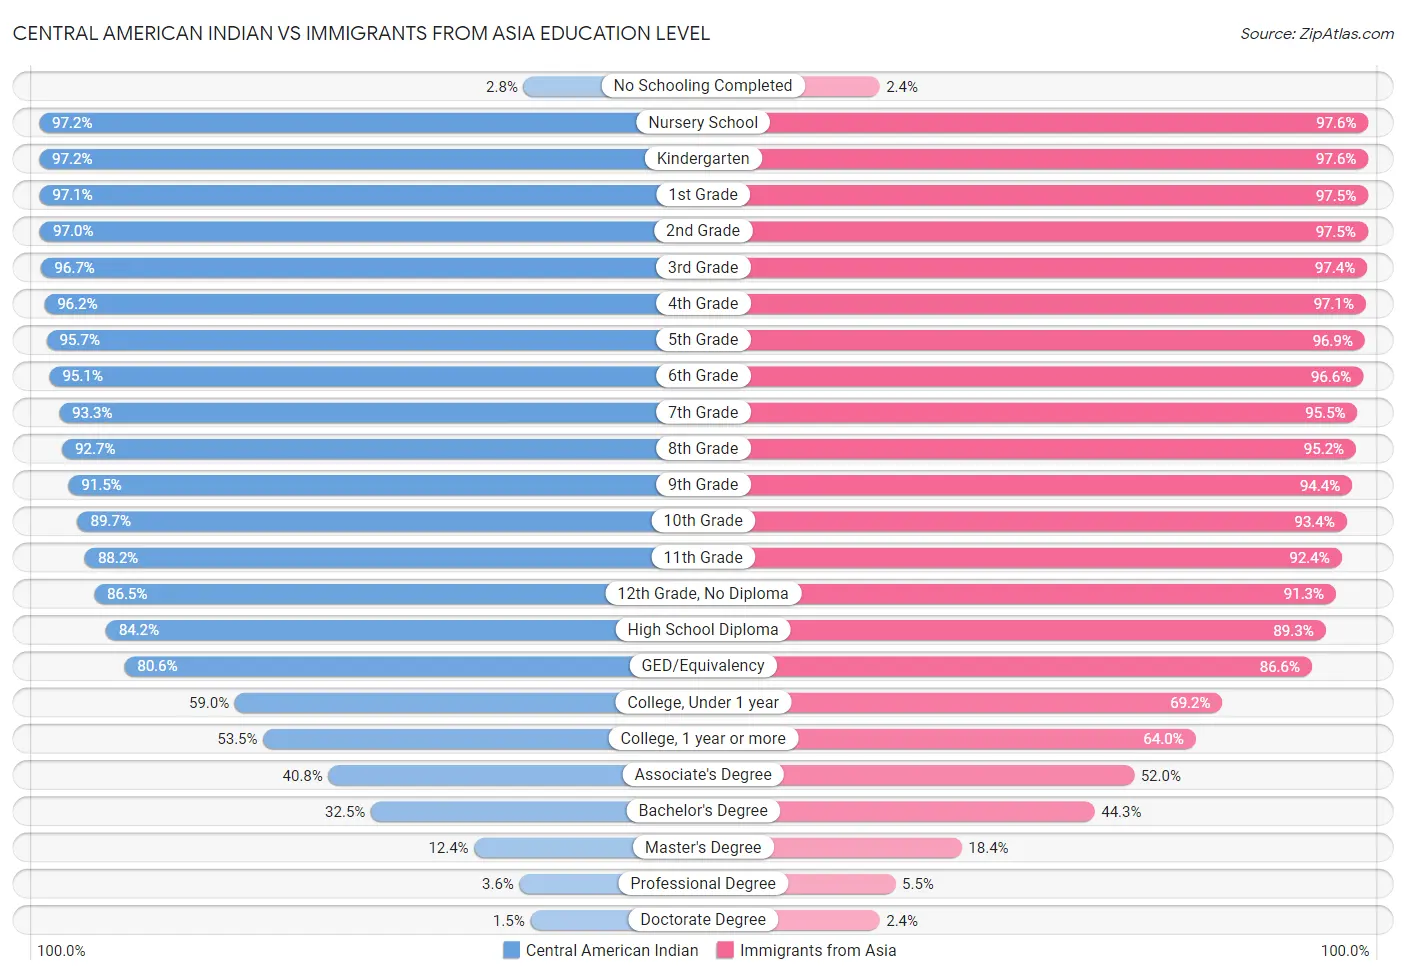 Central American Indian vs Immigrants from Asia Education Level